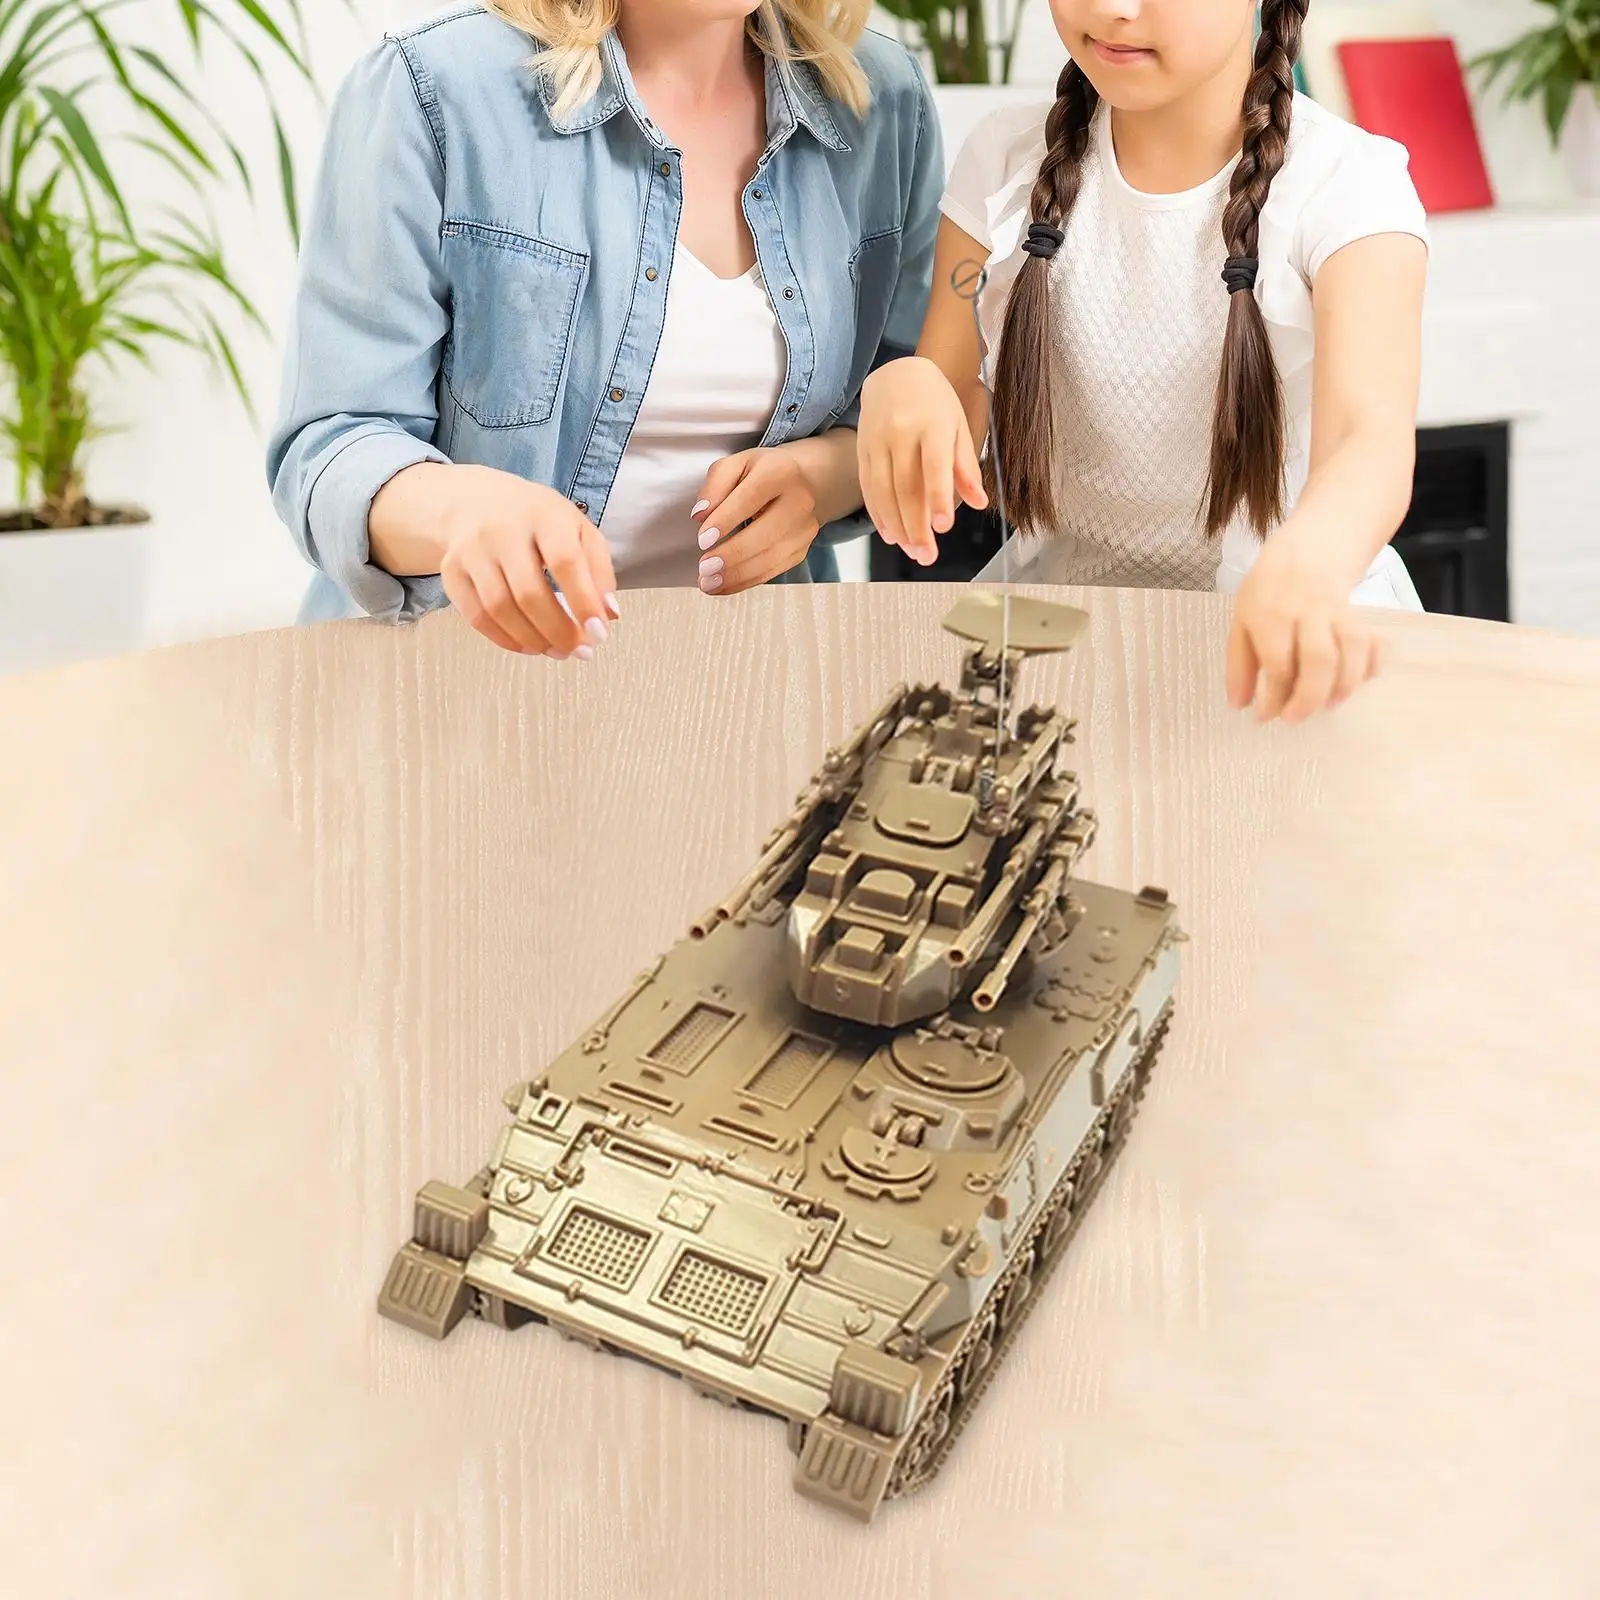 1/72 Building Model Kits Rotation Fort with Moving Wheels 4D Tank Model for Education Toy Table Scene Collection Gift Keepsake